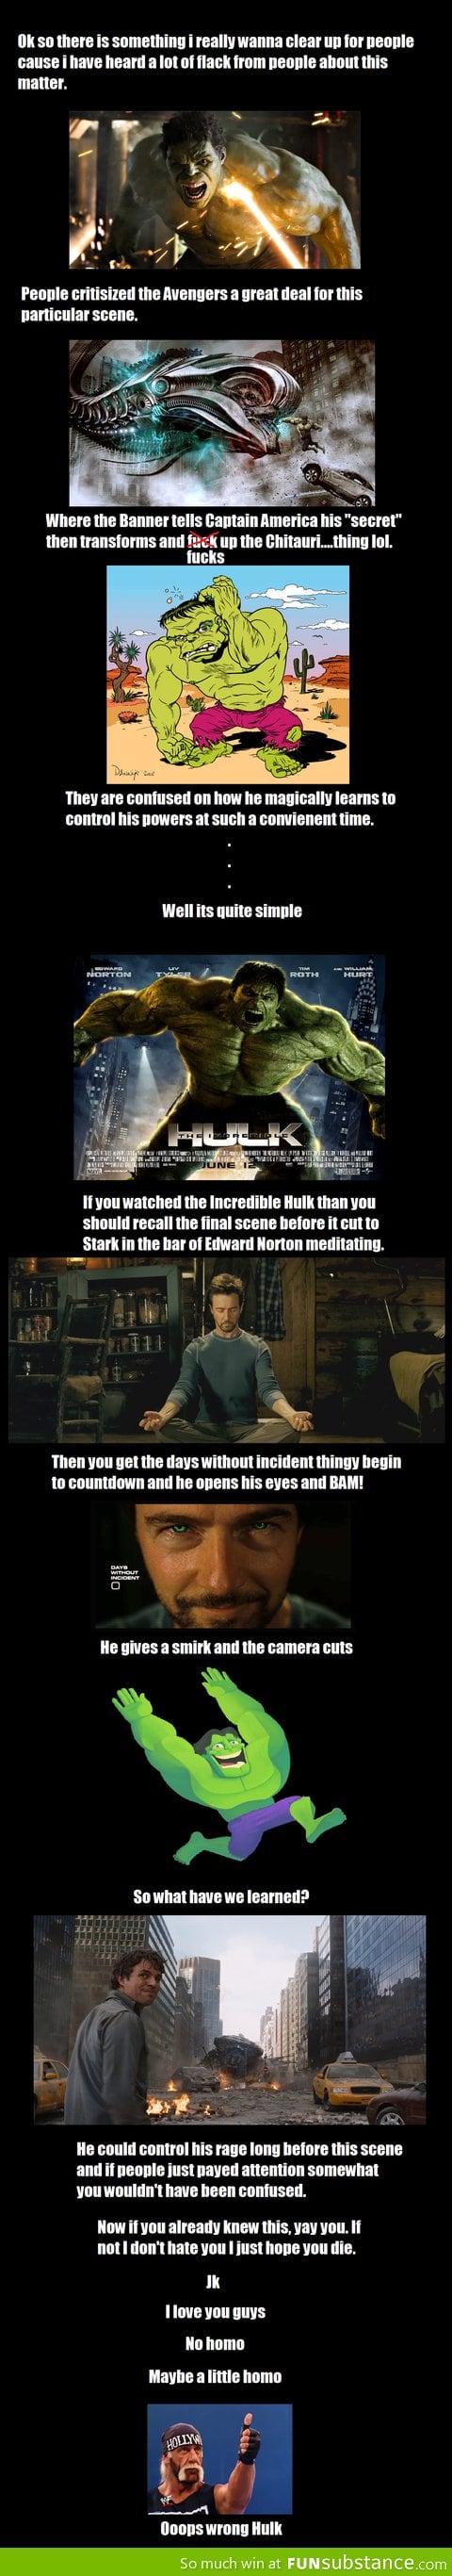 How Hulk manage to control his powers in The Avengers